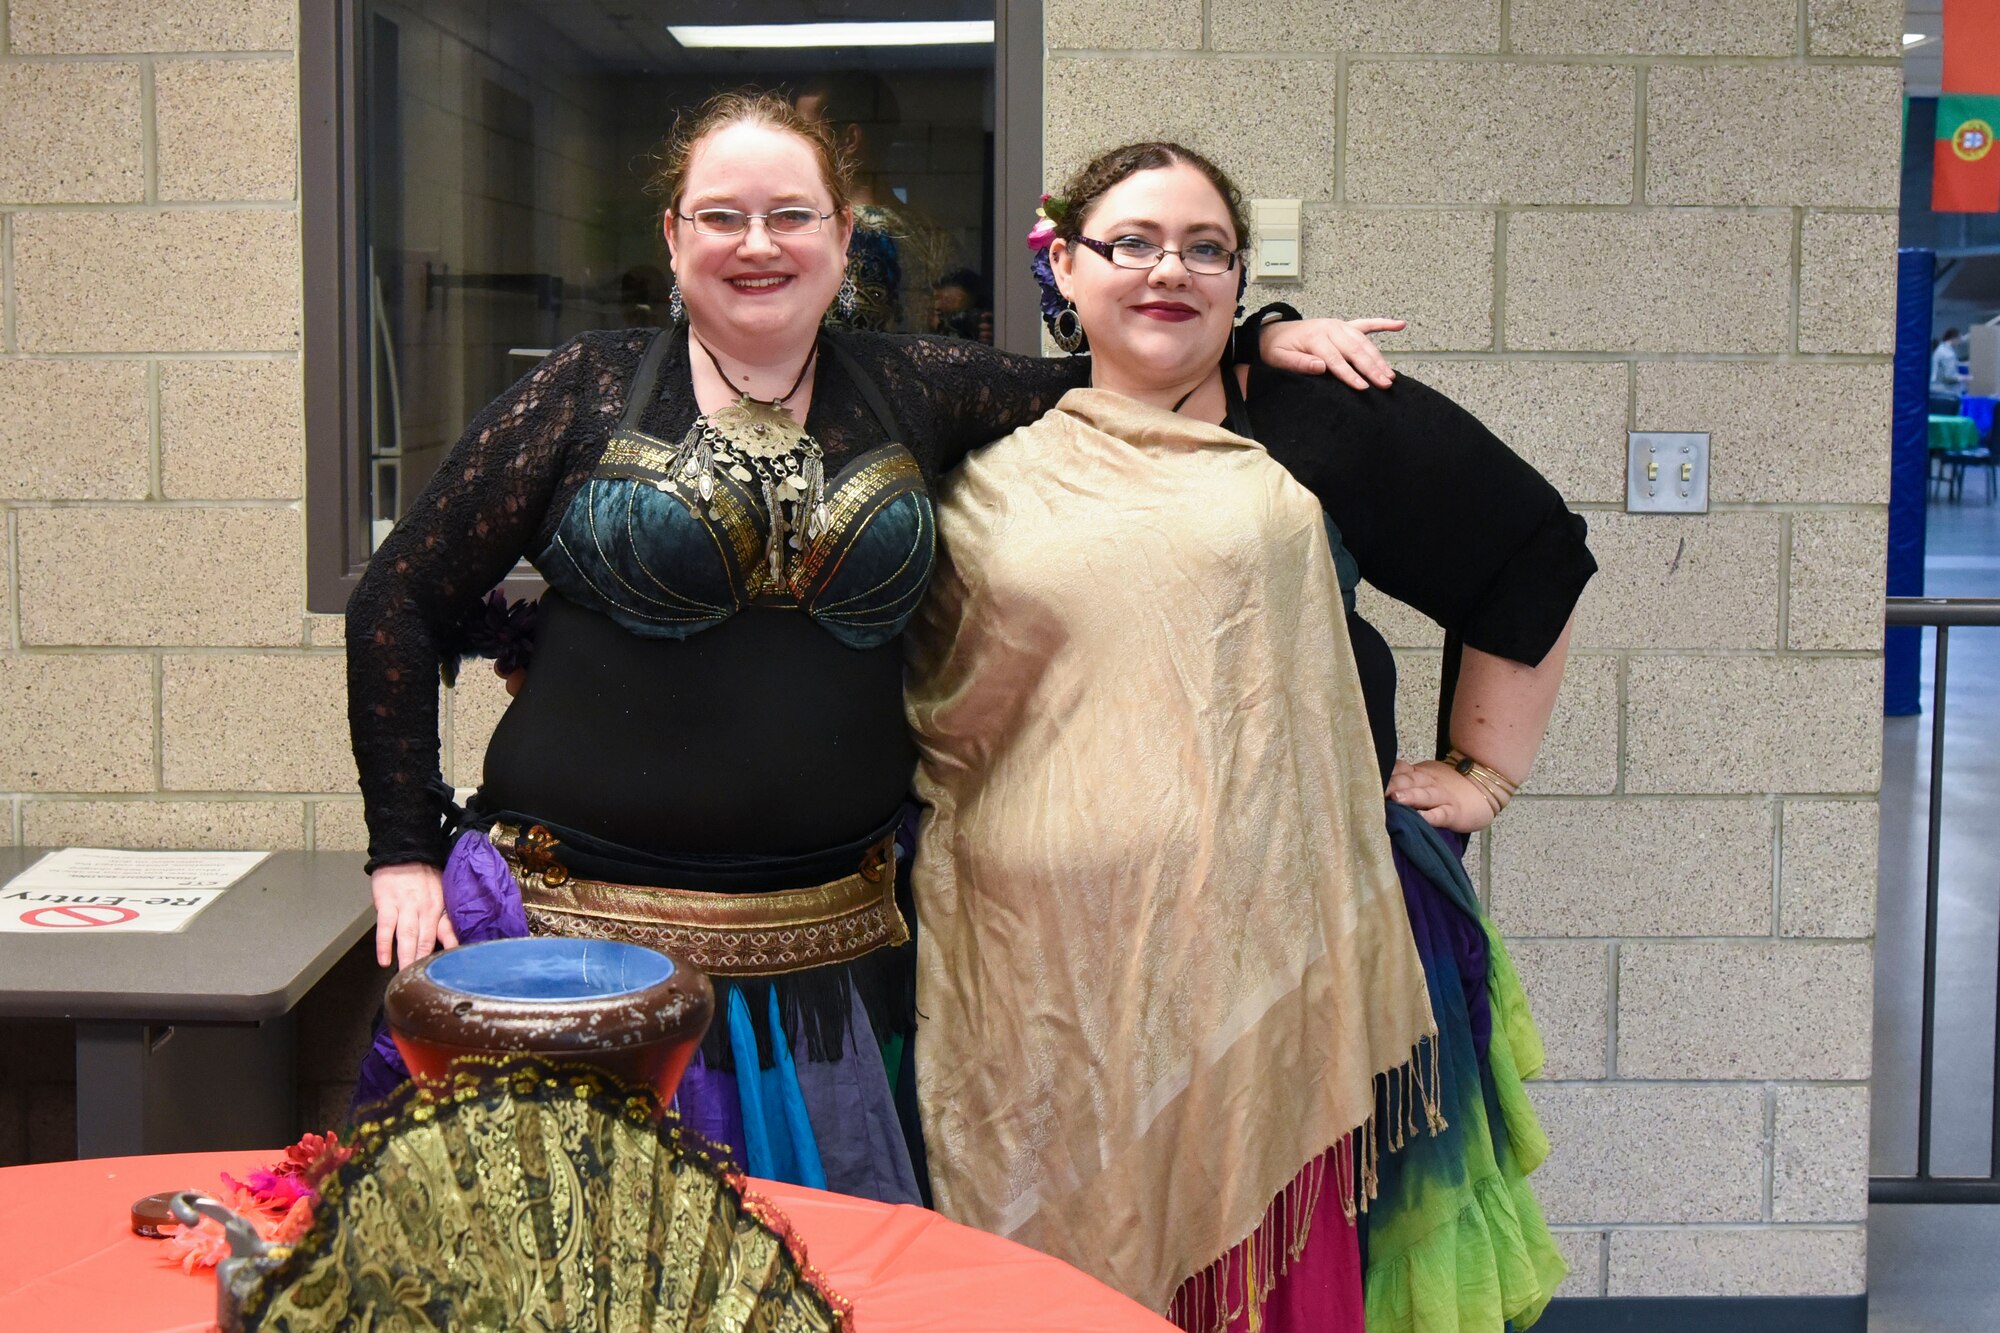 (Left) Kelly Ferguson and Amanda Burk, belly dancing instructors, pose for a photo June 20, 2018, at Grand Forks Air Force Base, North Dakota. Ferguson and Burk demonstrated the meditating benefits of belly dancing, and performed different techniques for those in attendance. (U.S. Air Force photo by Airman 1st Class Melody Wolff)